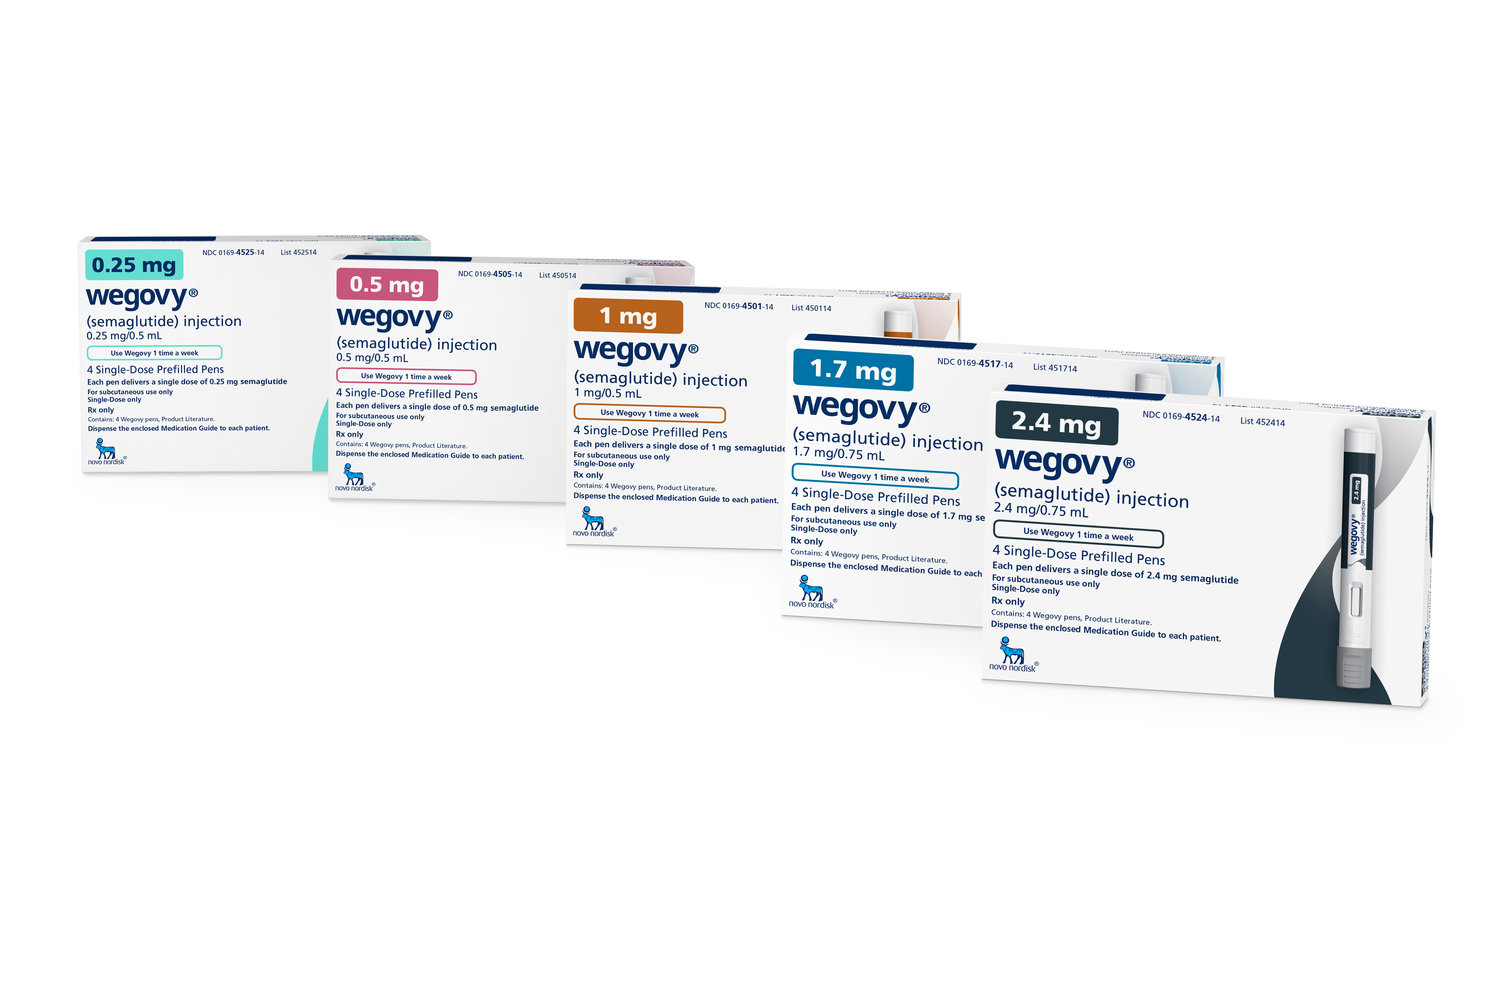 This image provided by Novo Nordisk in January 2023, shows packaging for the company's Wegovy drug. Children struggling with obesity should be evaluated and treated early and aggressively, with medications for kids as young as 12 and surgery for those as young as 13 who qualify, according to new guidelines released by the American Academy of Pediatrics on Monday, Jan. 9, 2023. A study published in the New England Journal of Medicine in December 2022, found that Wegovy helped teens reduce their body mass index by about 16% on average, better than the results in adults. (Novo Nordisk via AP)